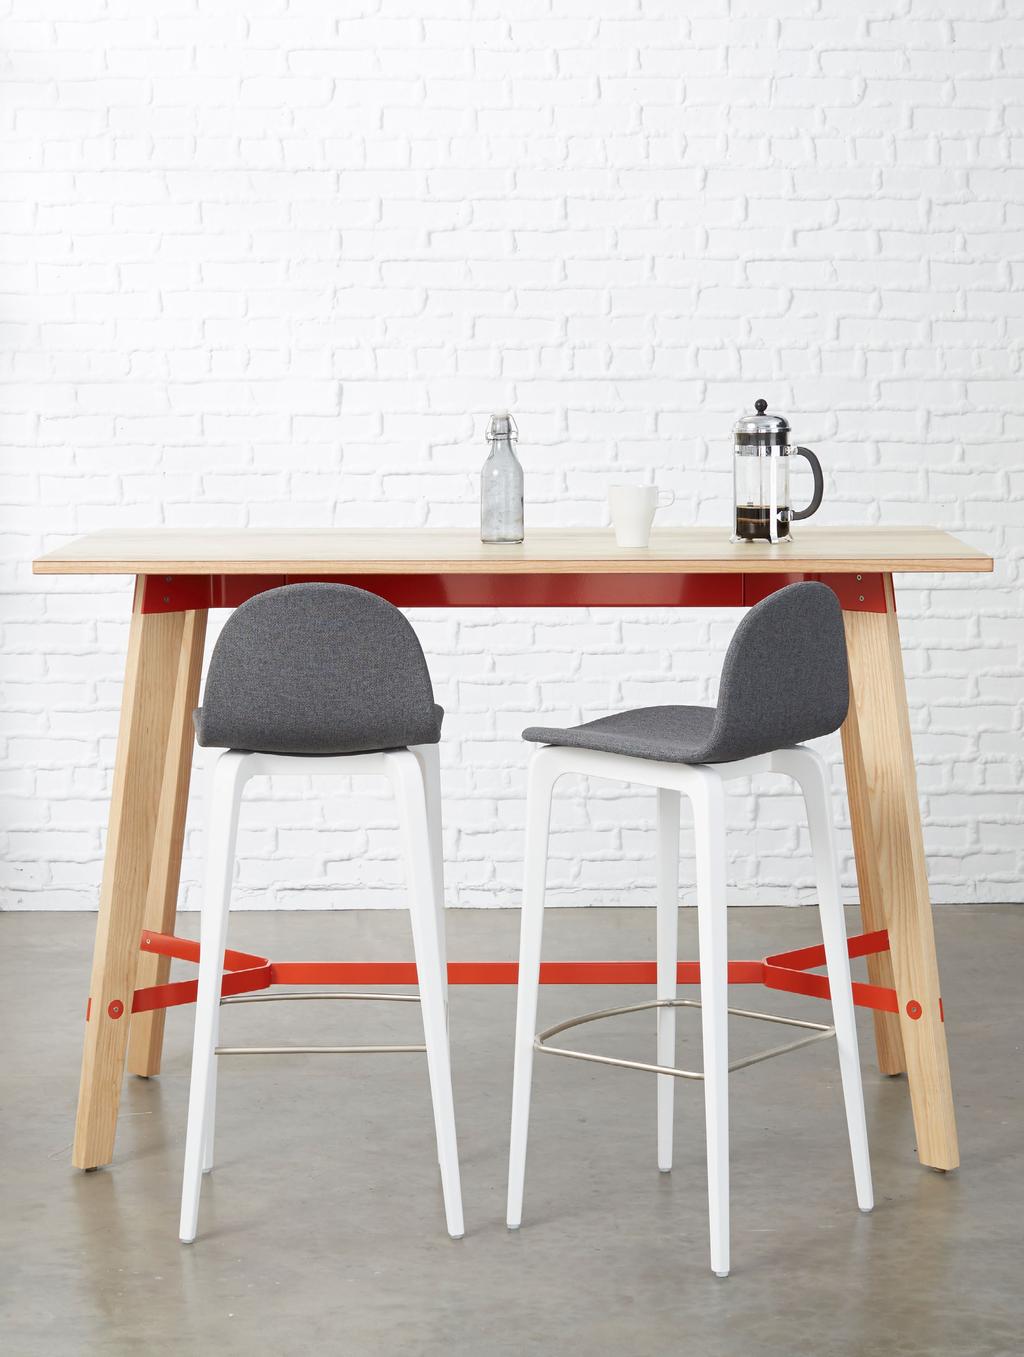 techniques that result in a stunning and comfortable barstool.